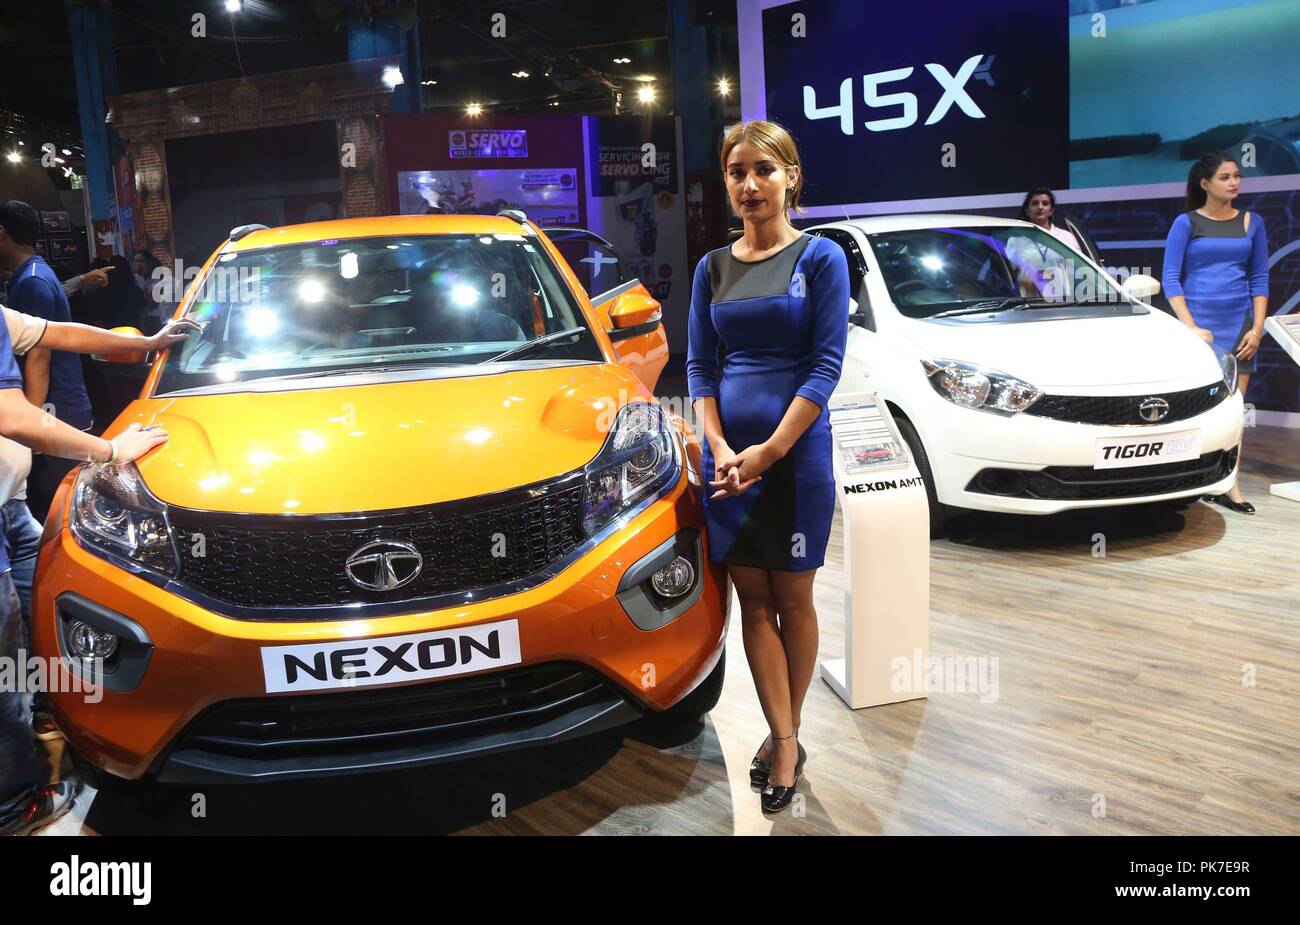 Kathmandu, Nepal. 11th Sep, 2018. Models pose with cars at the Nepal Automobile Dealers' Association (NADA) Auto Show 2018 in Kathmandu, capital of Nepal, Sept. 11, 2018. The 13th NADA Auto Show aims at enticing the modern and technological advancements to auto enthusiasts ahead of festive season. Credit: Sunil Sharma/Xinhua/Alamy Live News Stock Photo